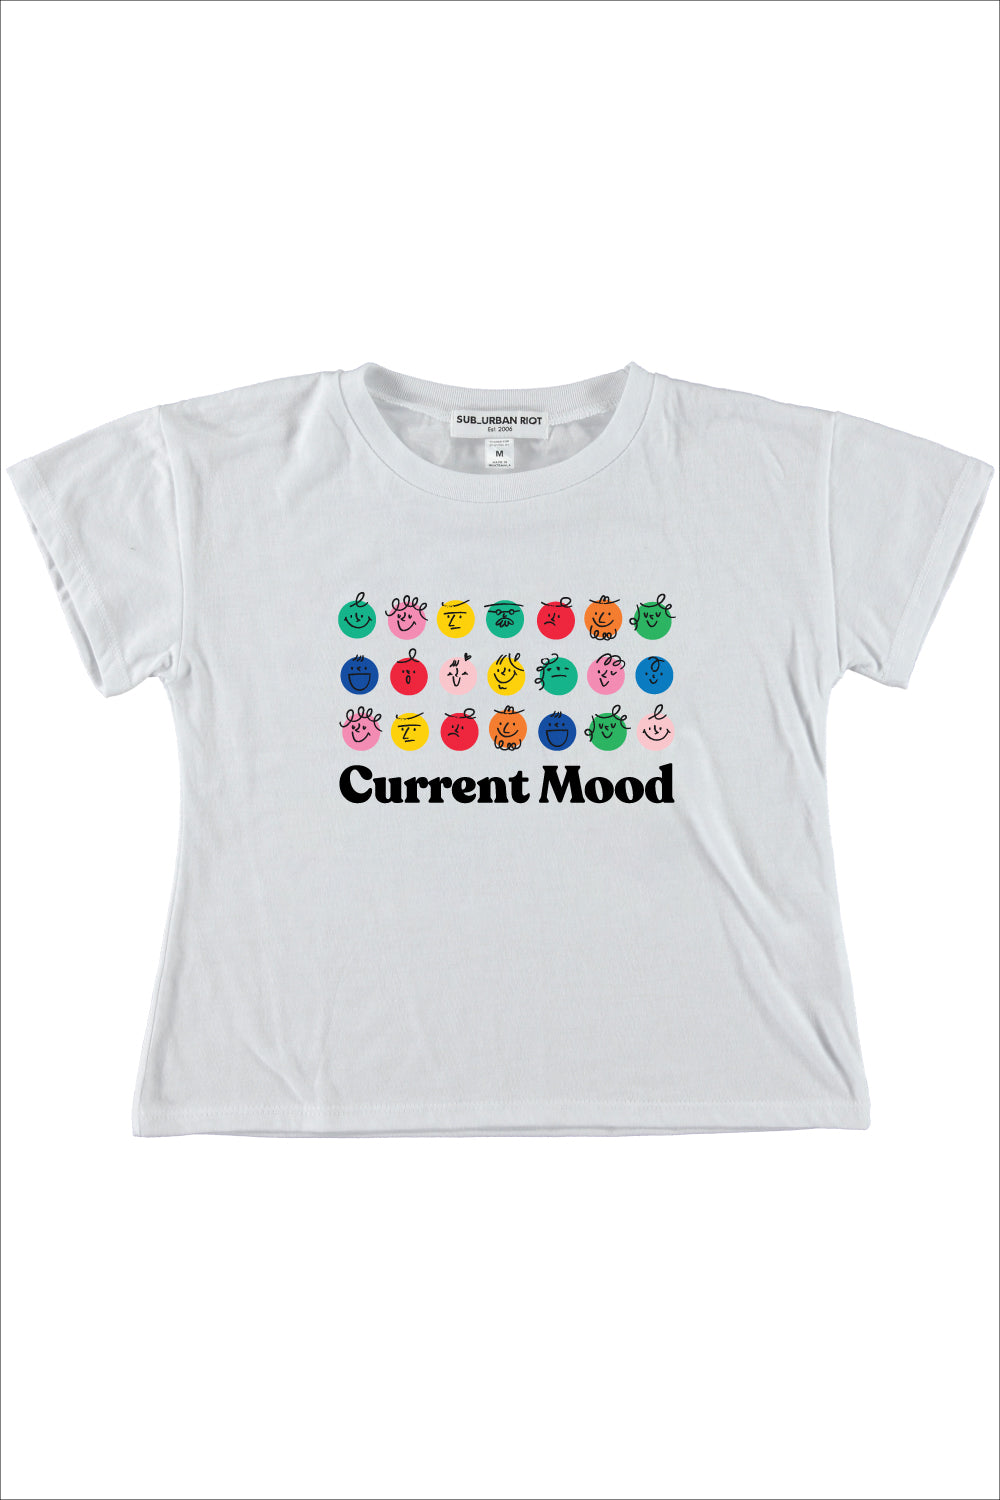 CURRENT MOOD YOUTH SIZE CROP TEE